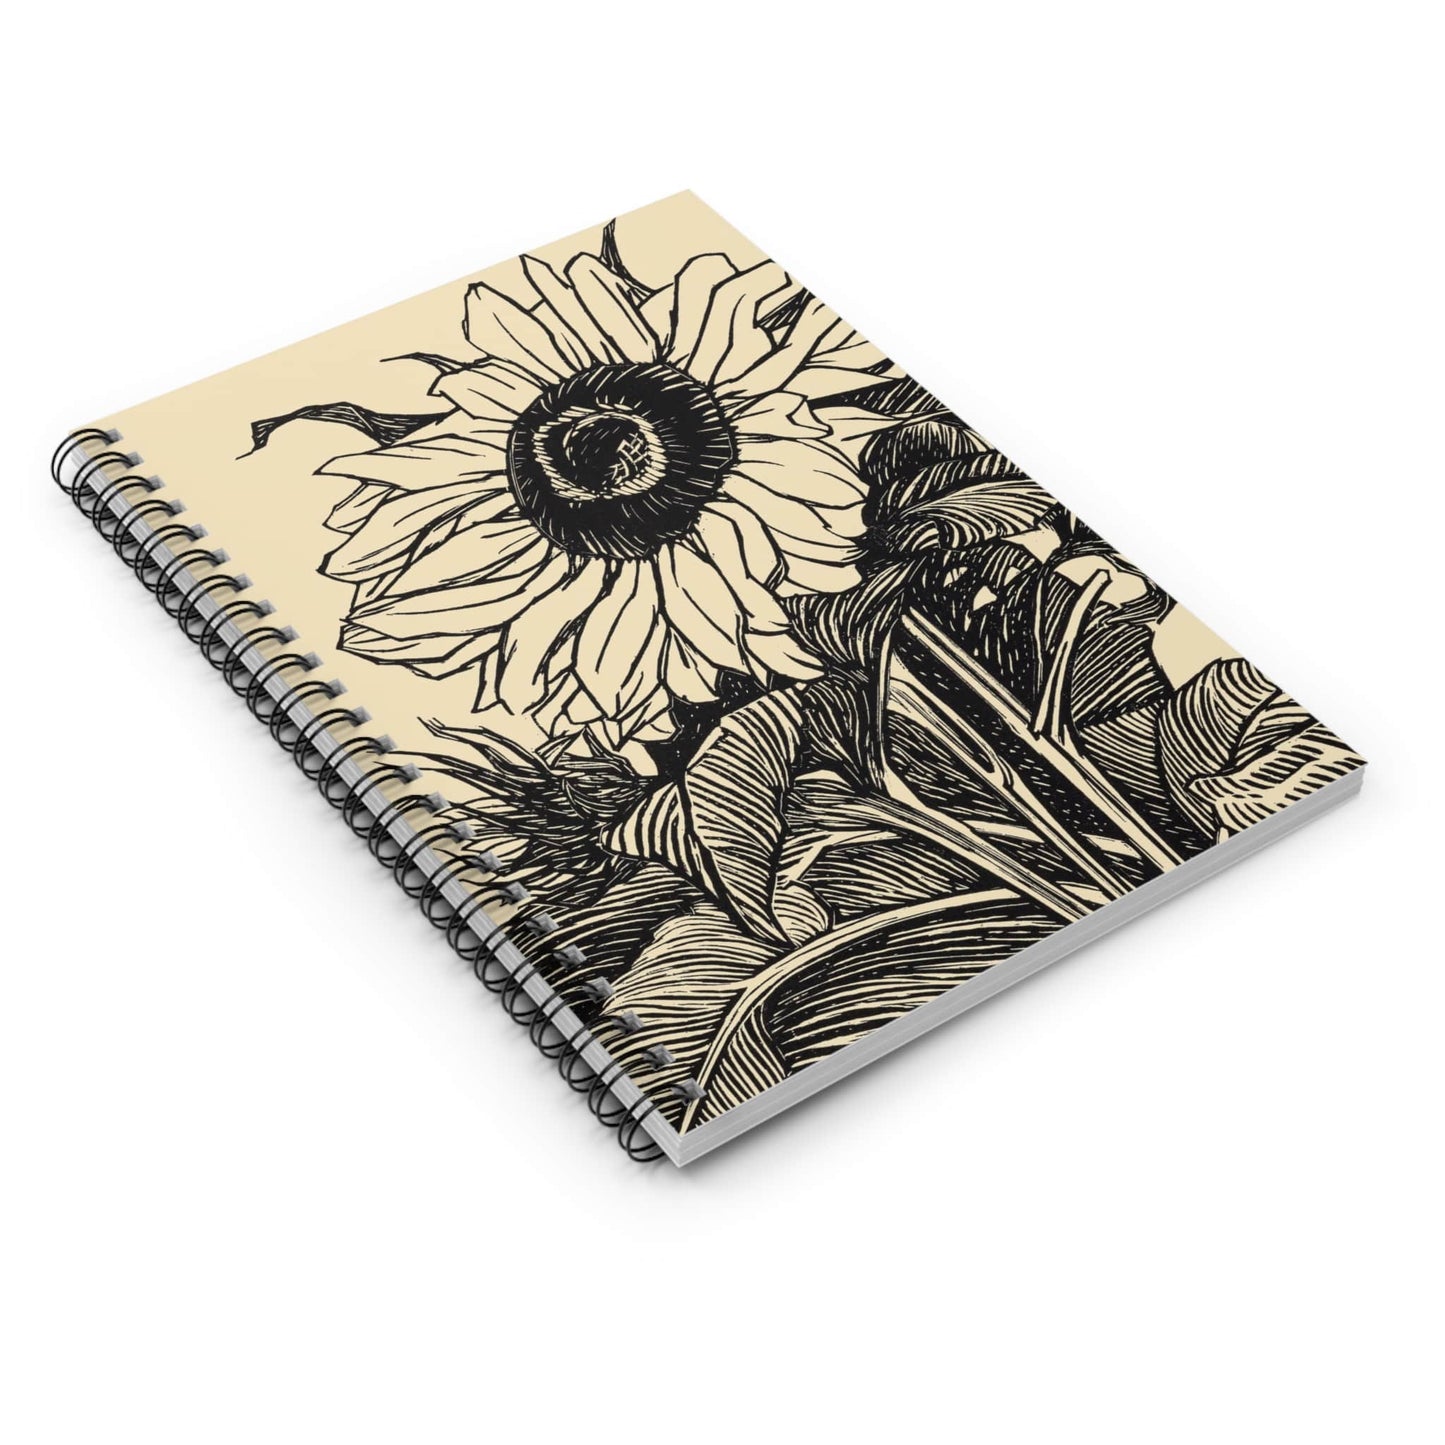 Ink Drawn Flower Spiral Notebook Laying Flat on White Surface